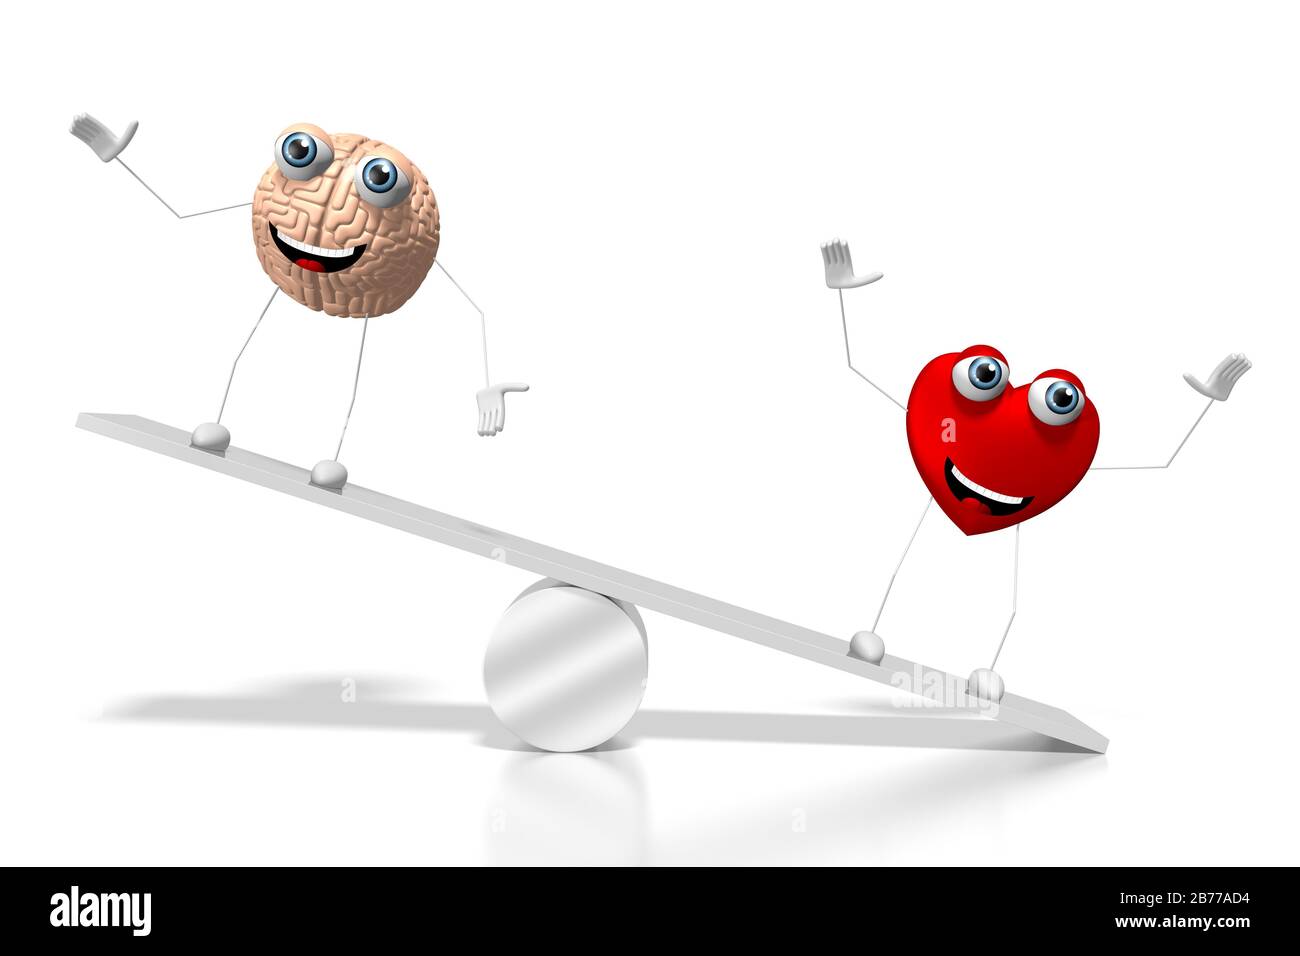 3D heart and brain cartoon characters, swing concept - great for topics like emotions etc. Stock Photo